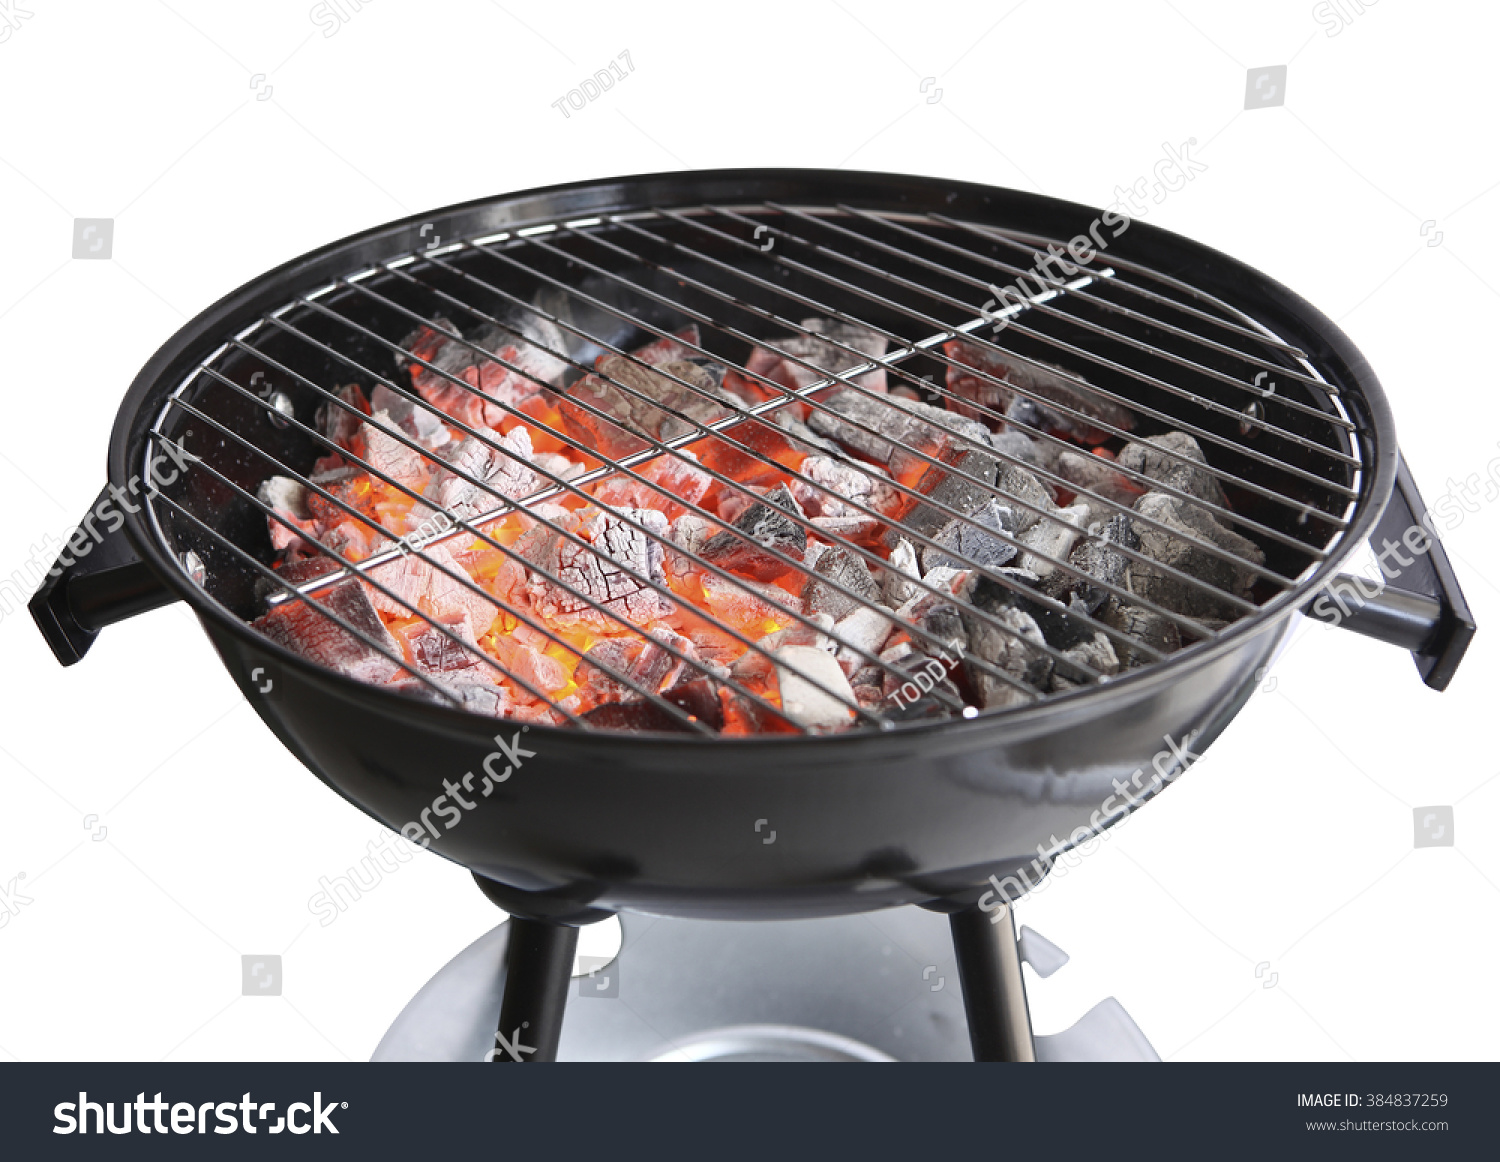 Barbecue On White Background Stock Photo (Edit Now) 384837259